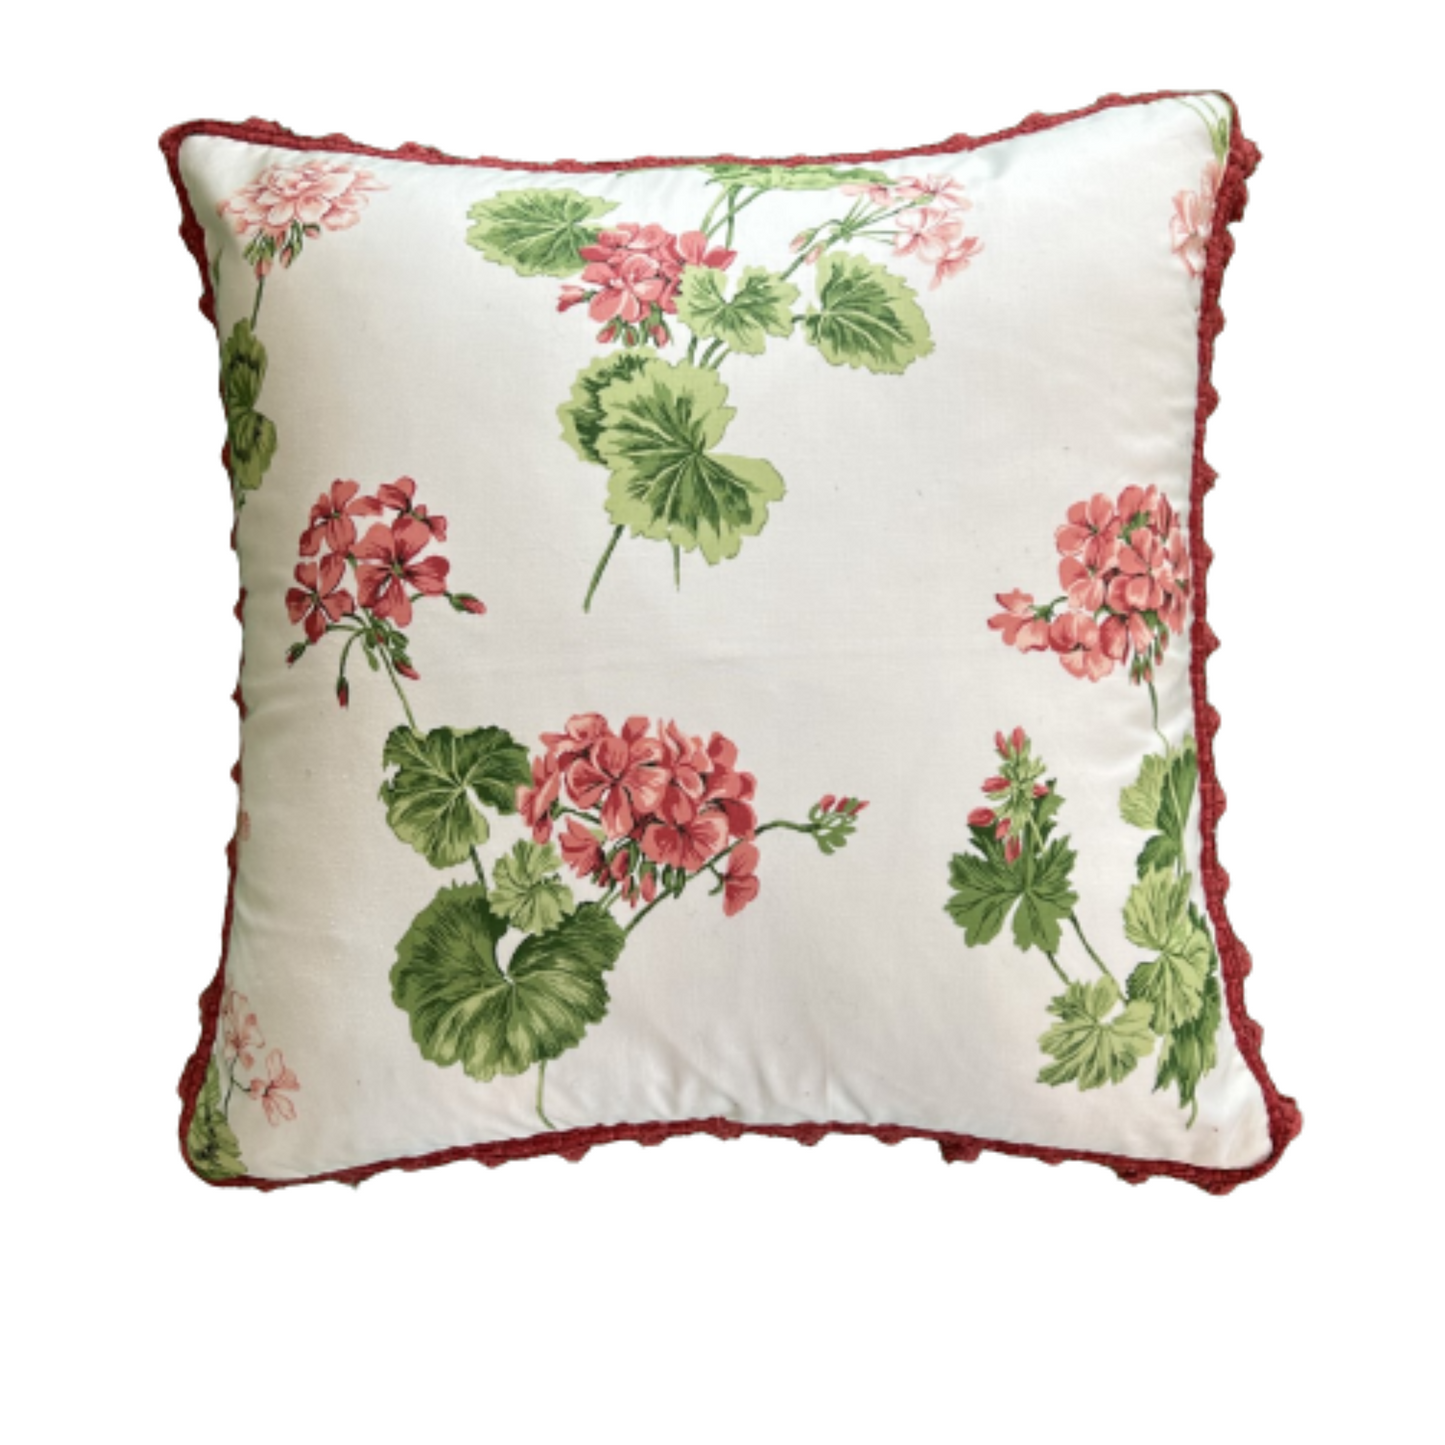 Red Geranium 22 x 22 Inches Decorative Designer Pillow with Down Feather Insert